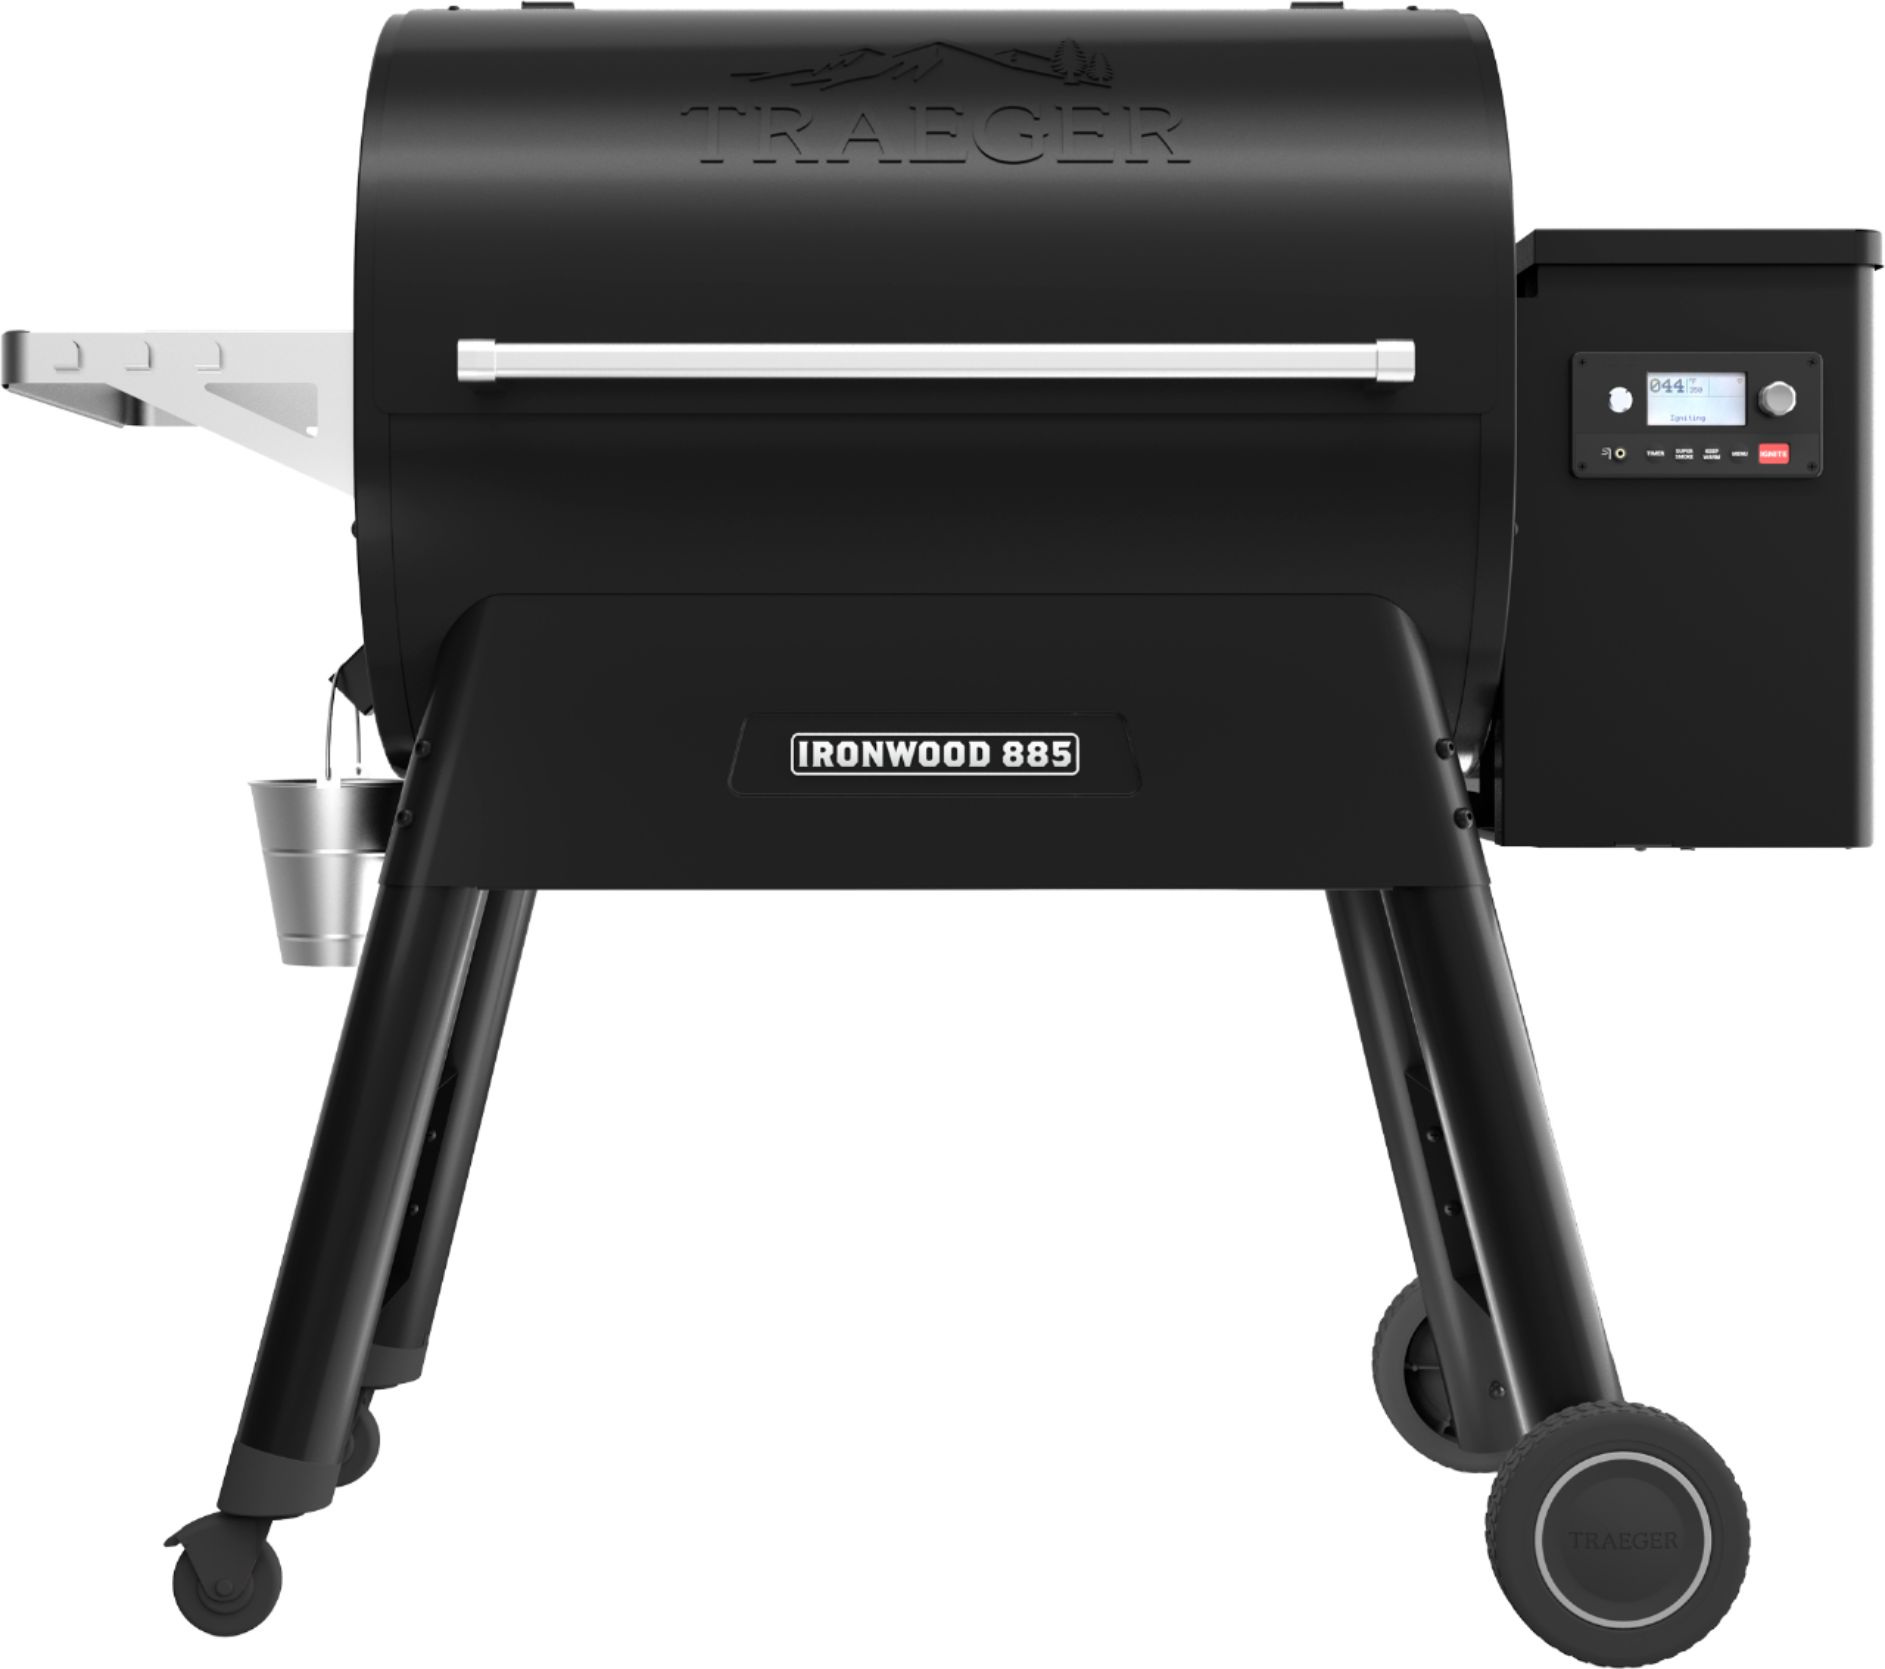 Angle View: Traeger Grills - Ironwood 885 Pellet Grill and Smoker with WiFIRE - Black